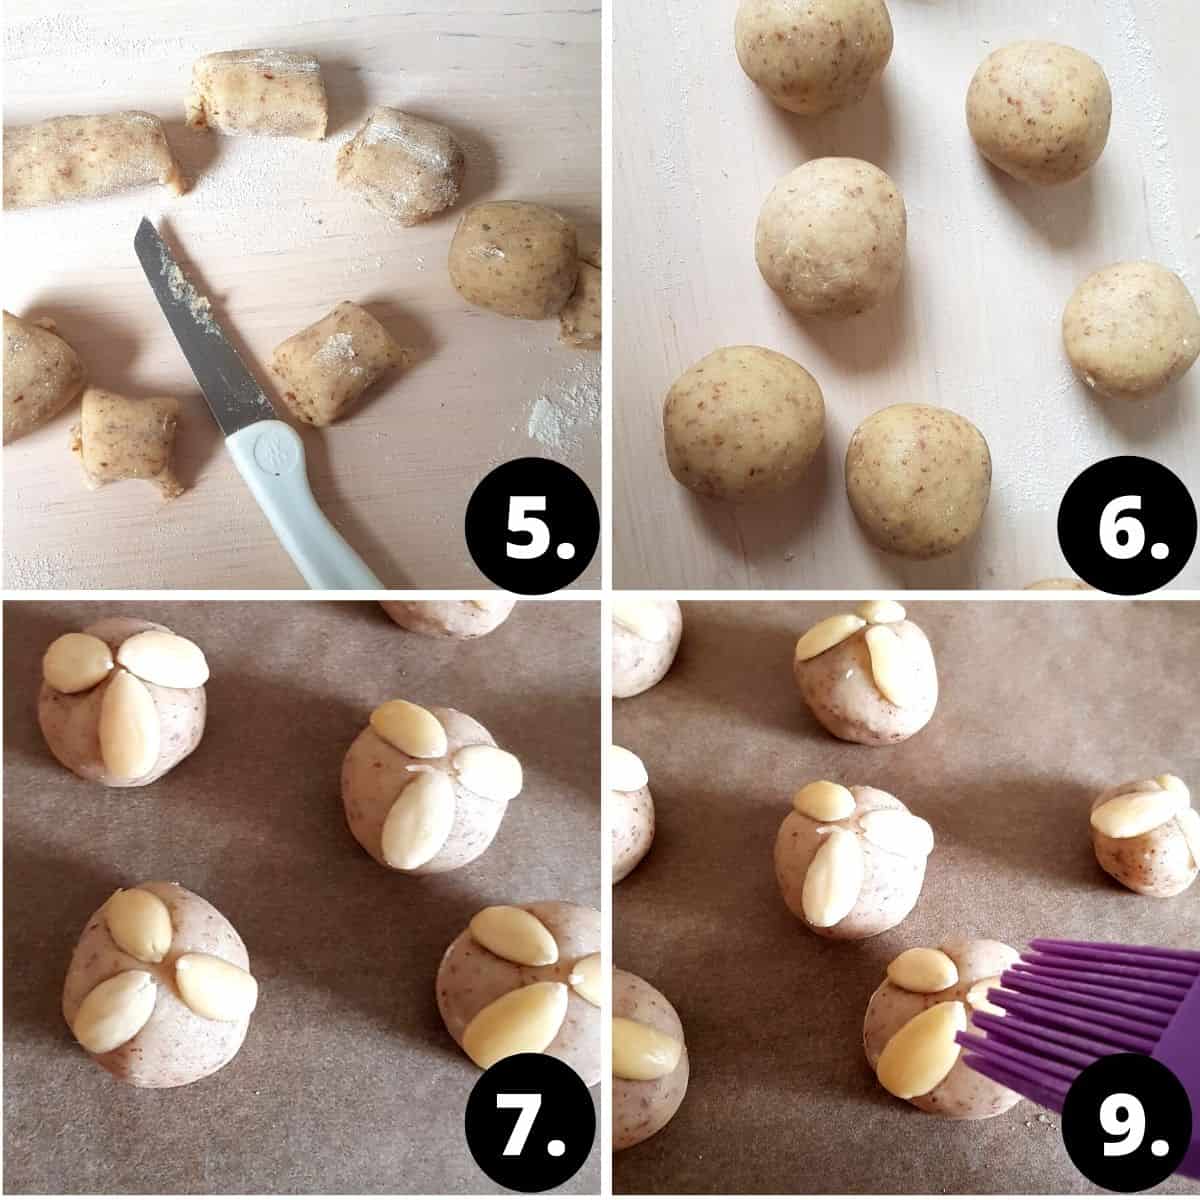 a collage of 4 images. 1. marzipan being cut into pieces. 2 Marzipan being rolled into balls. 3. marzipan being brushed with egg wash